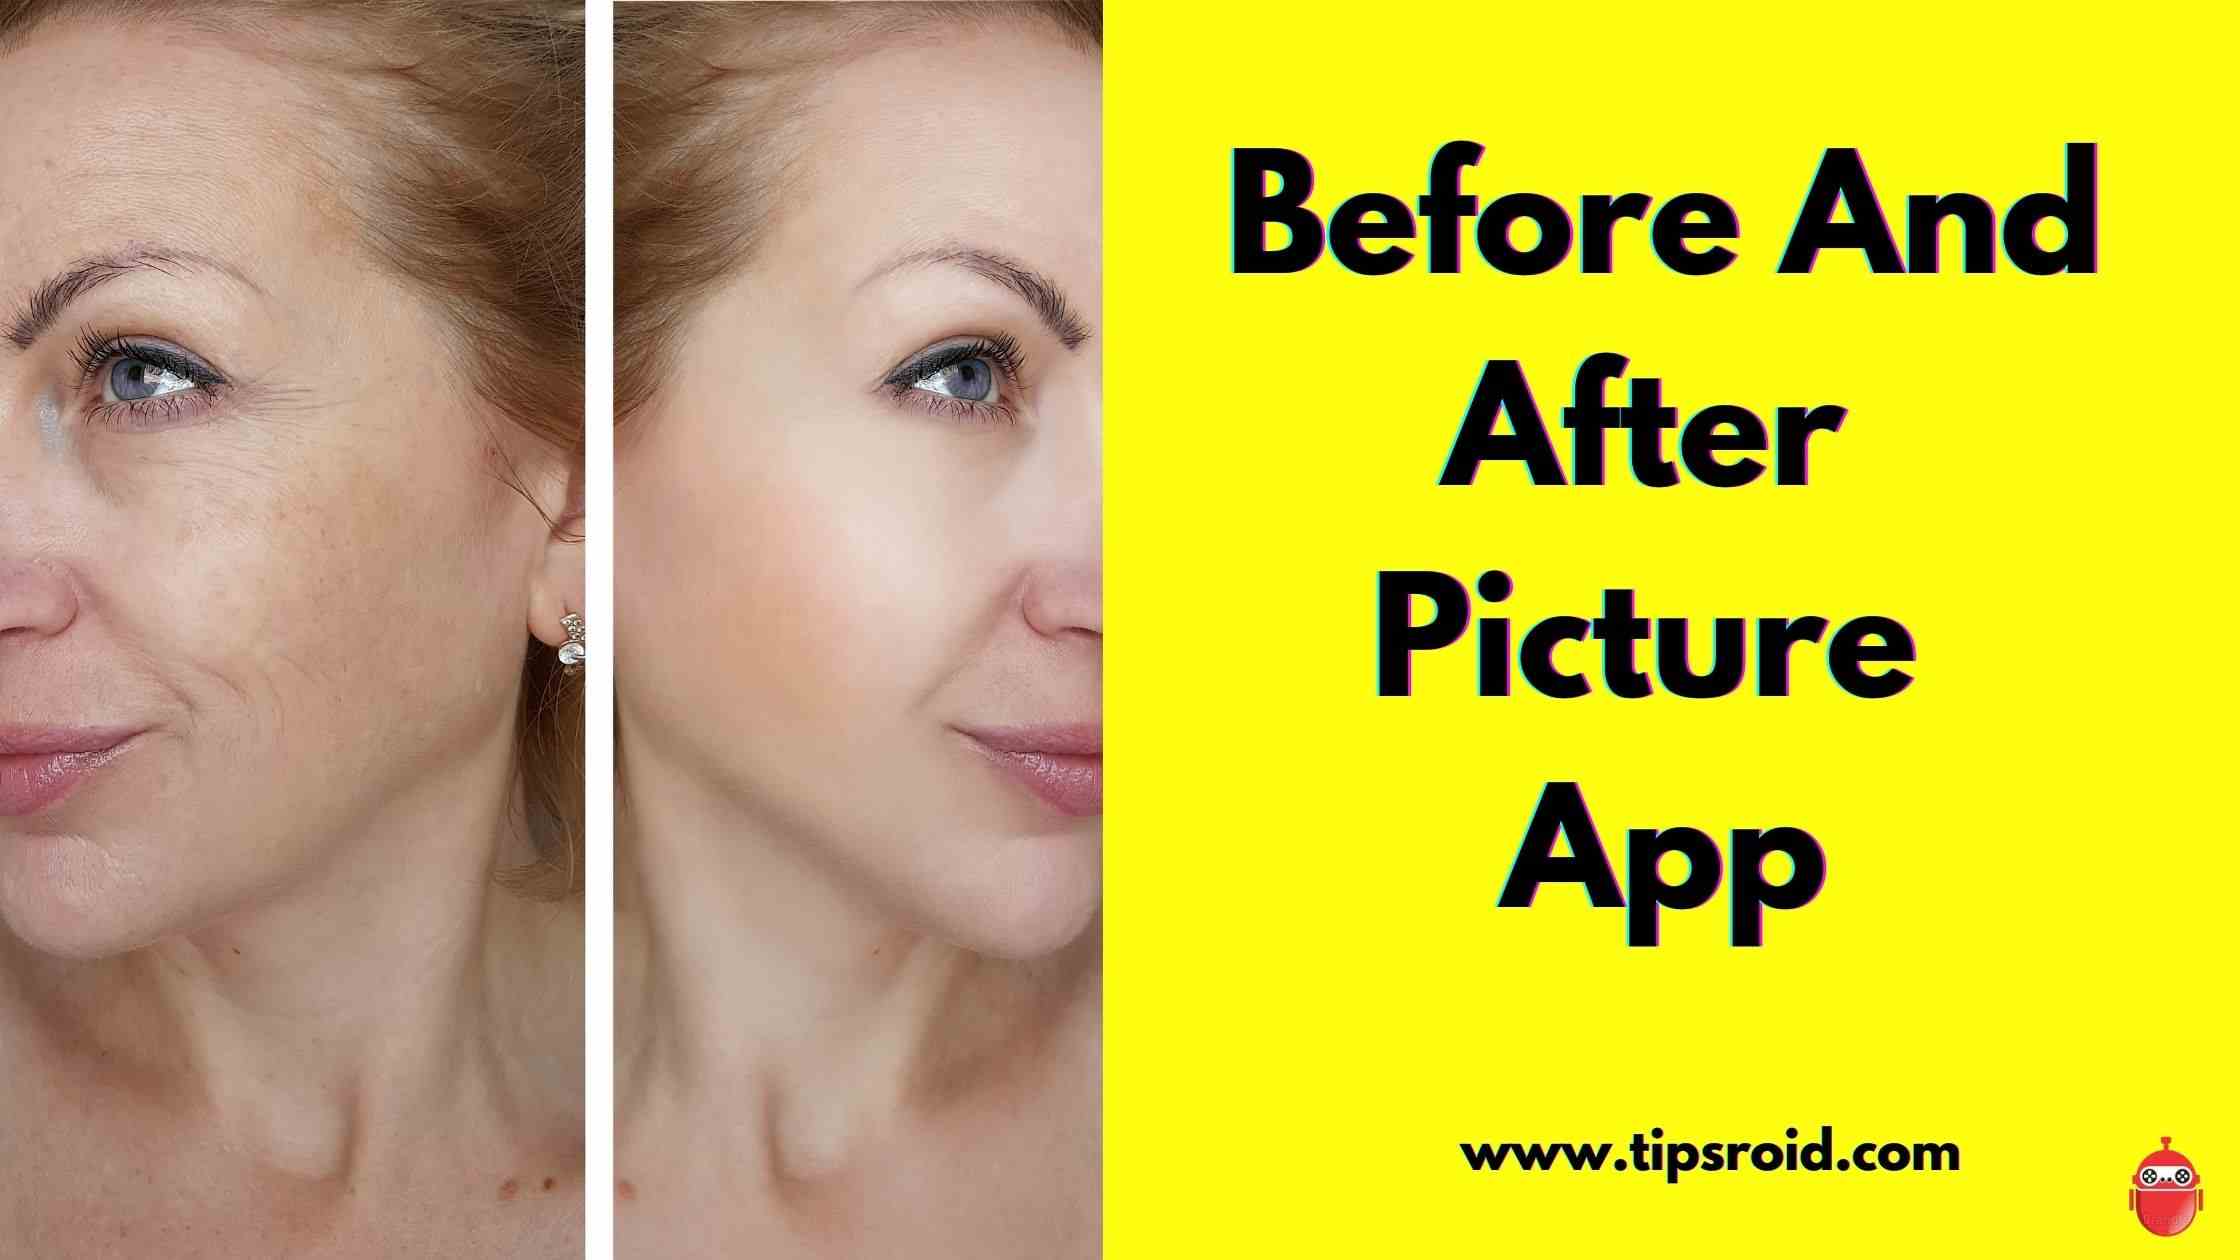 10 Best Before And After Picture App For Android & iPhone